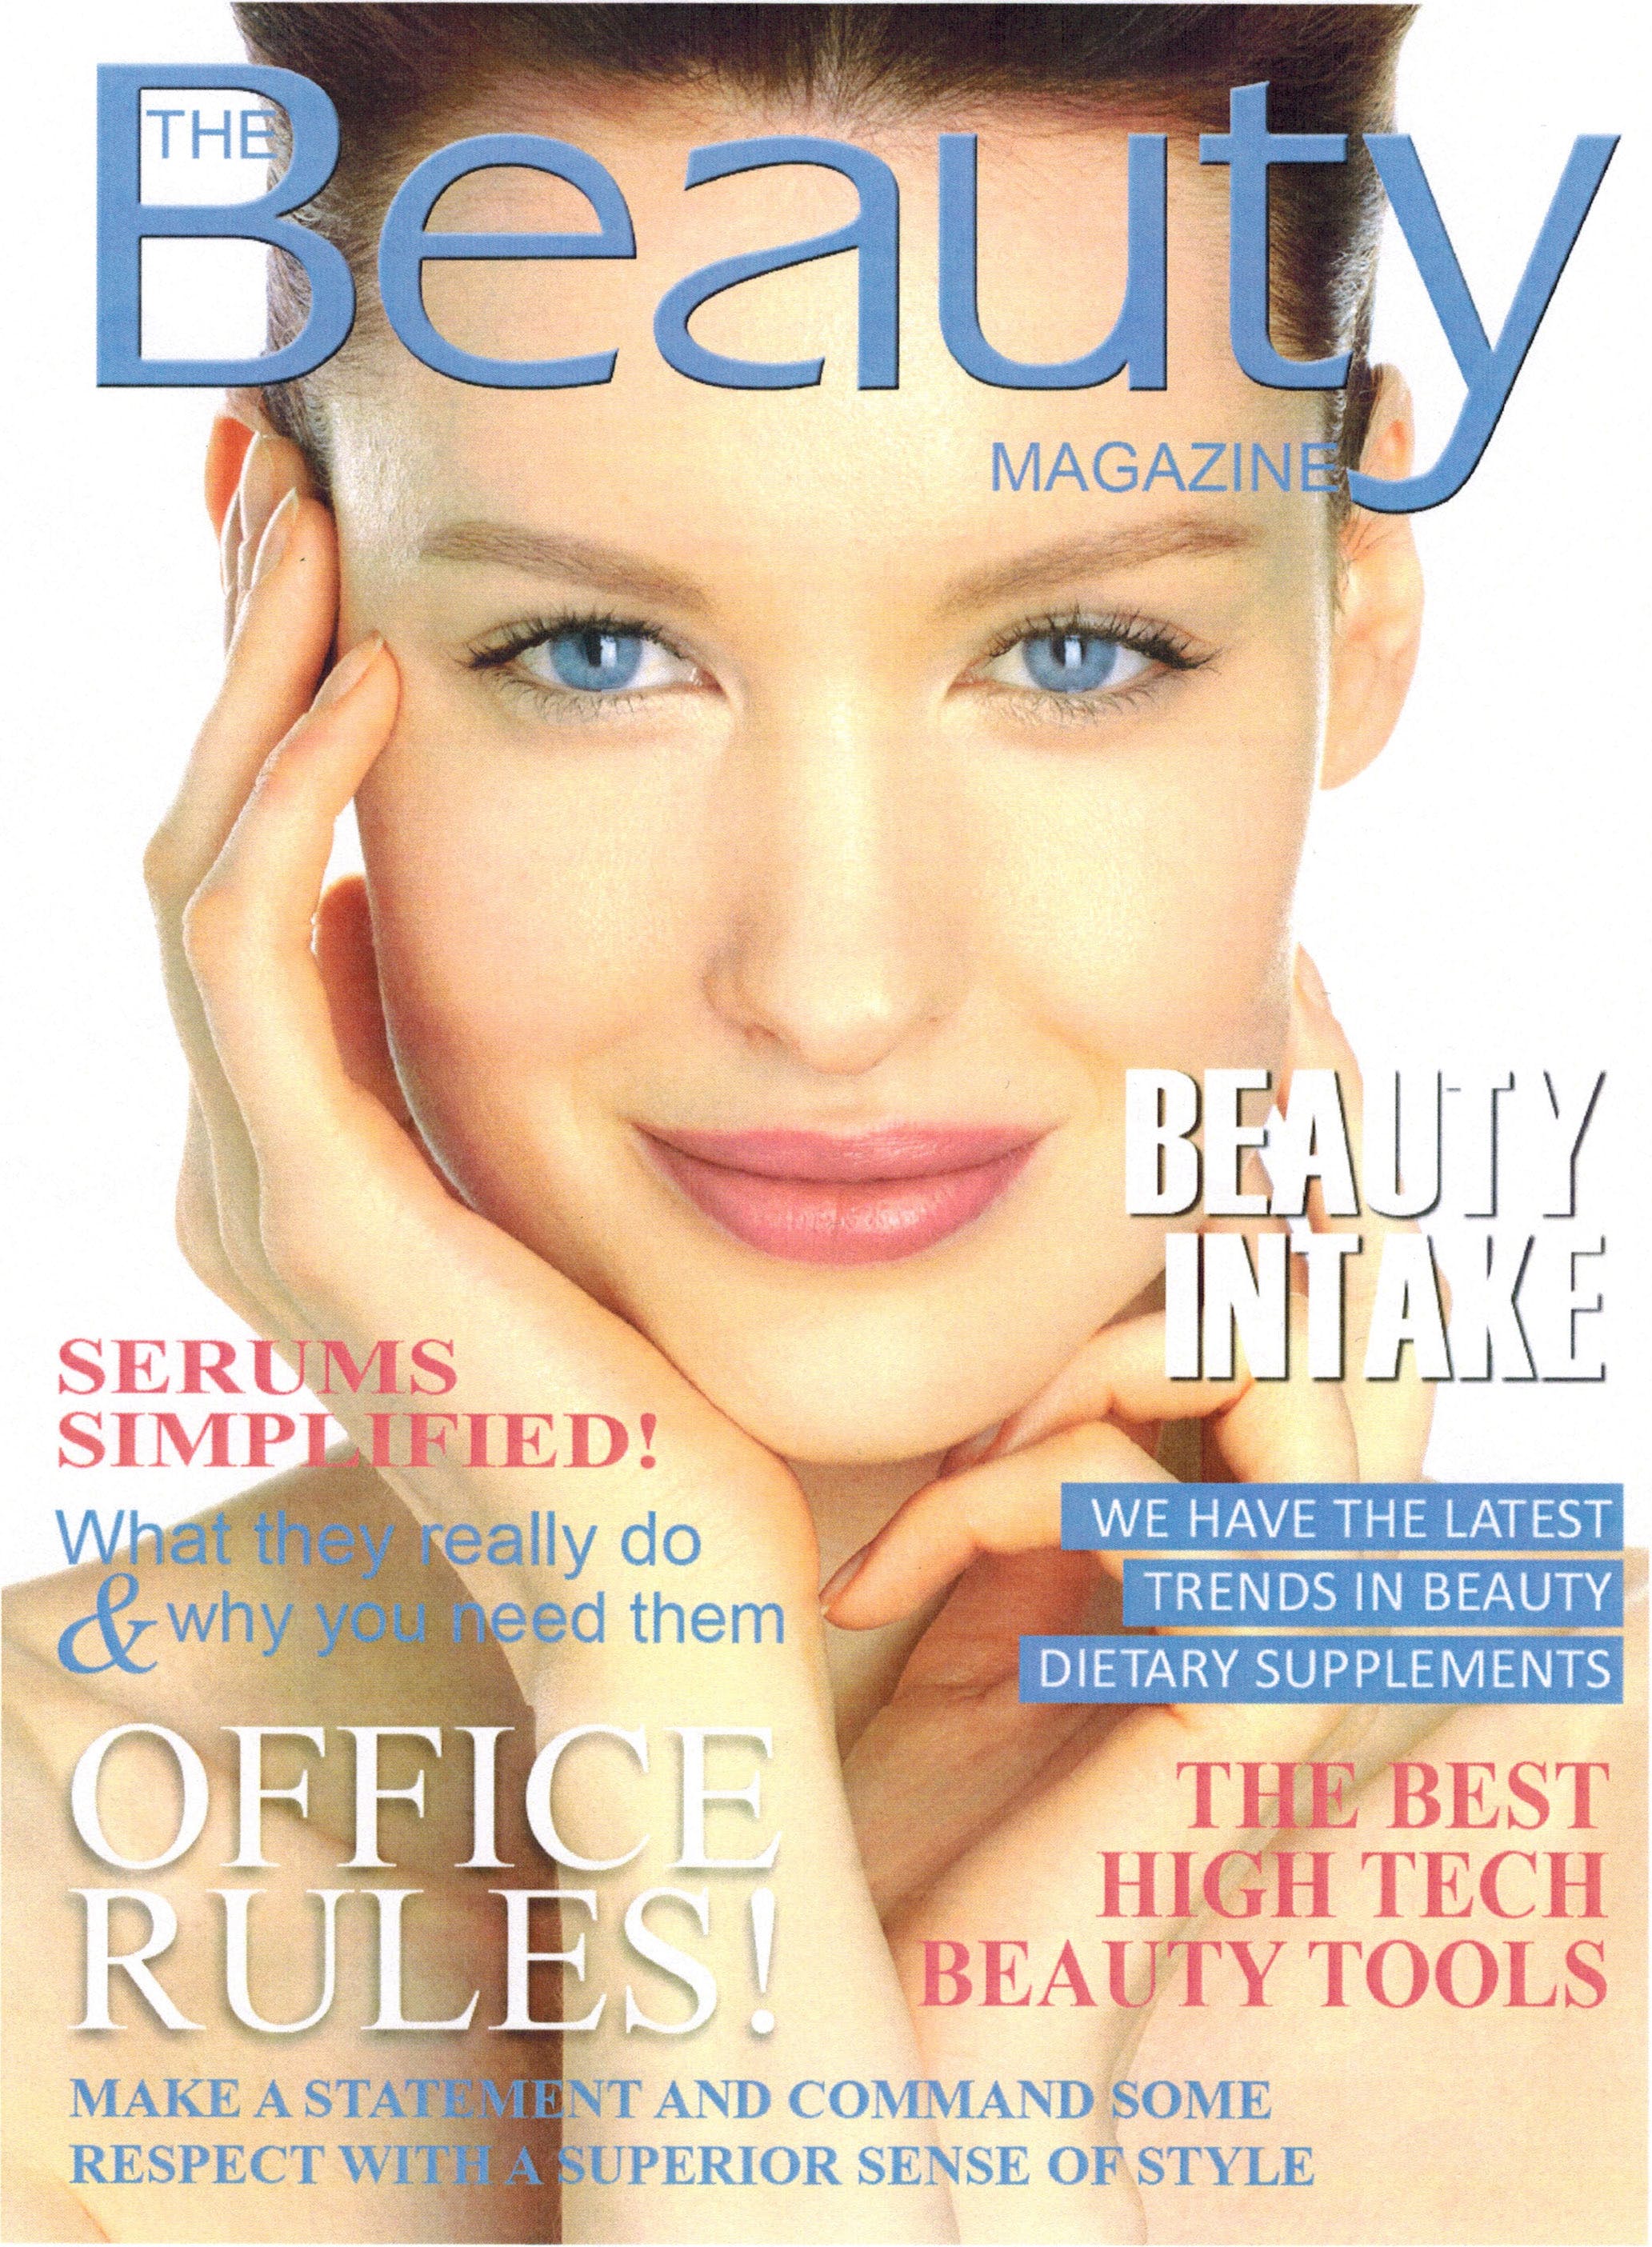 The Beauty Magazine featuring the PMD Personal Microderm